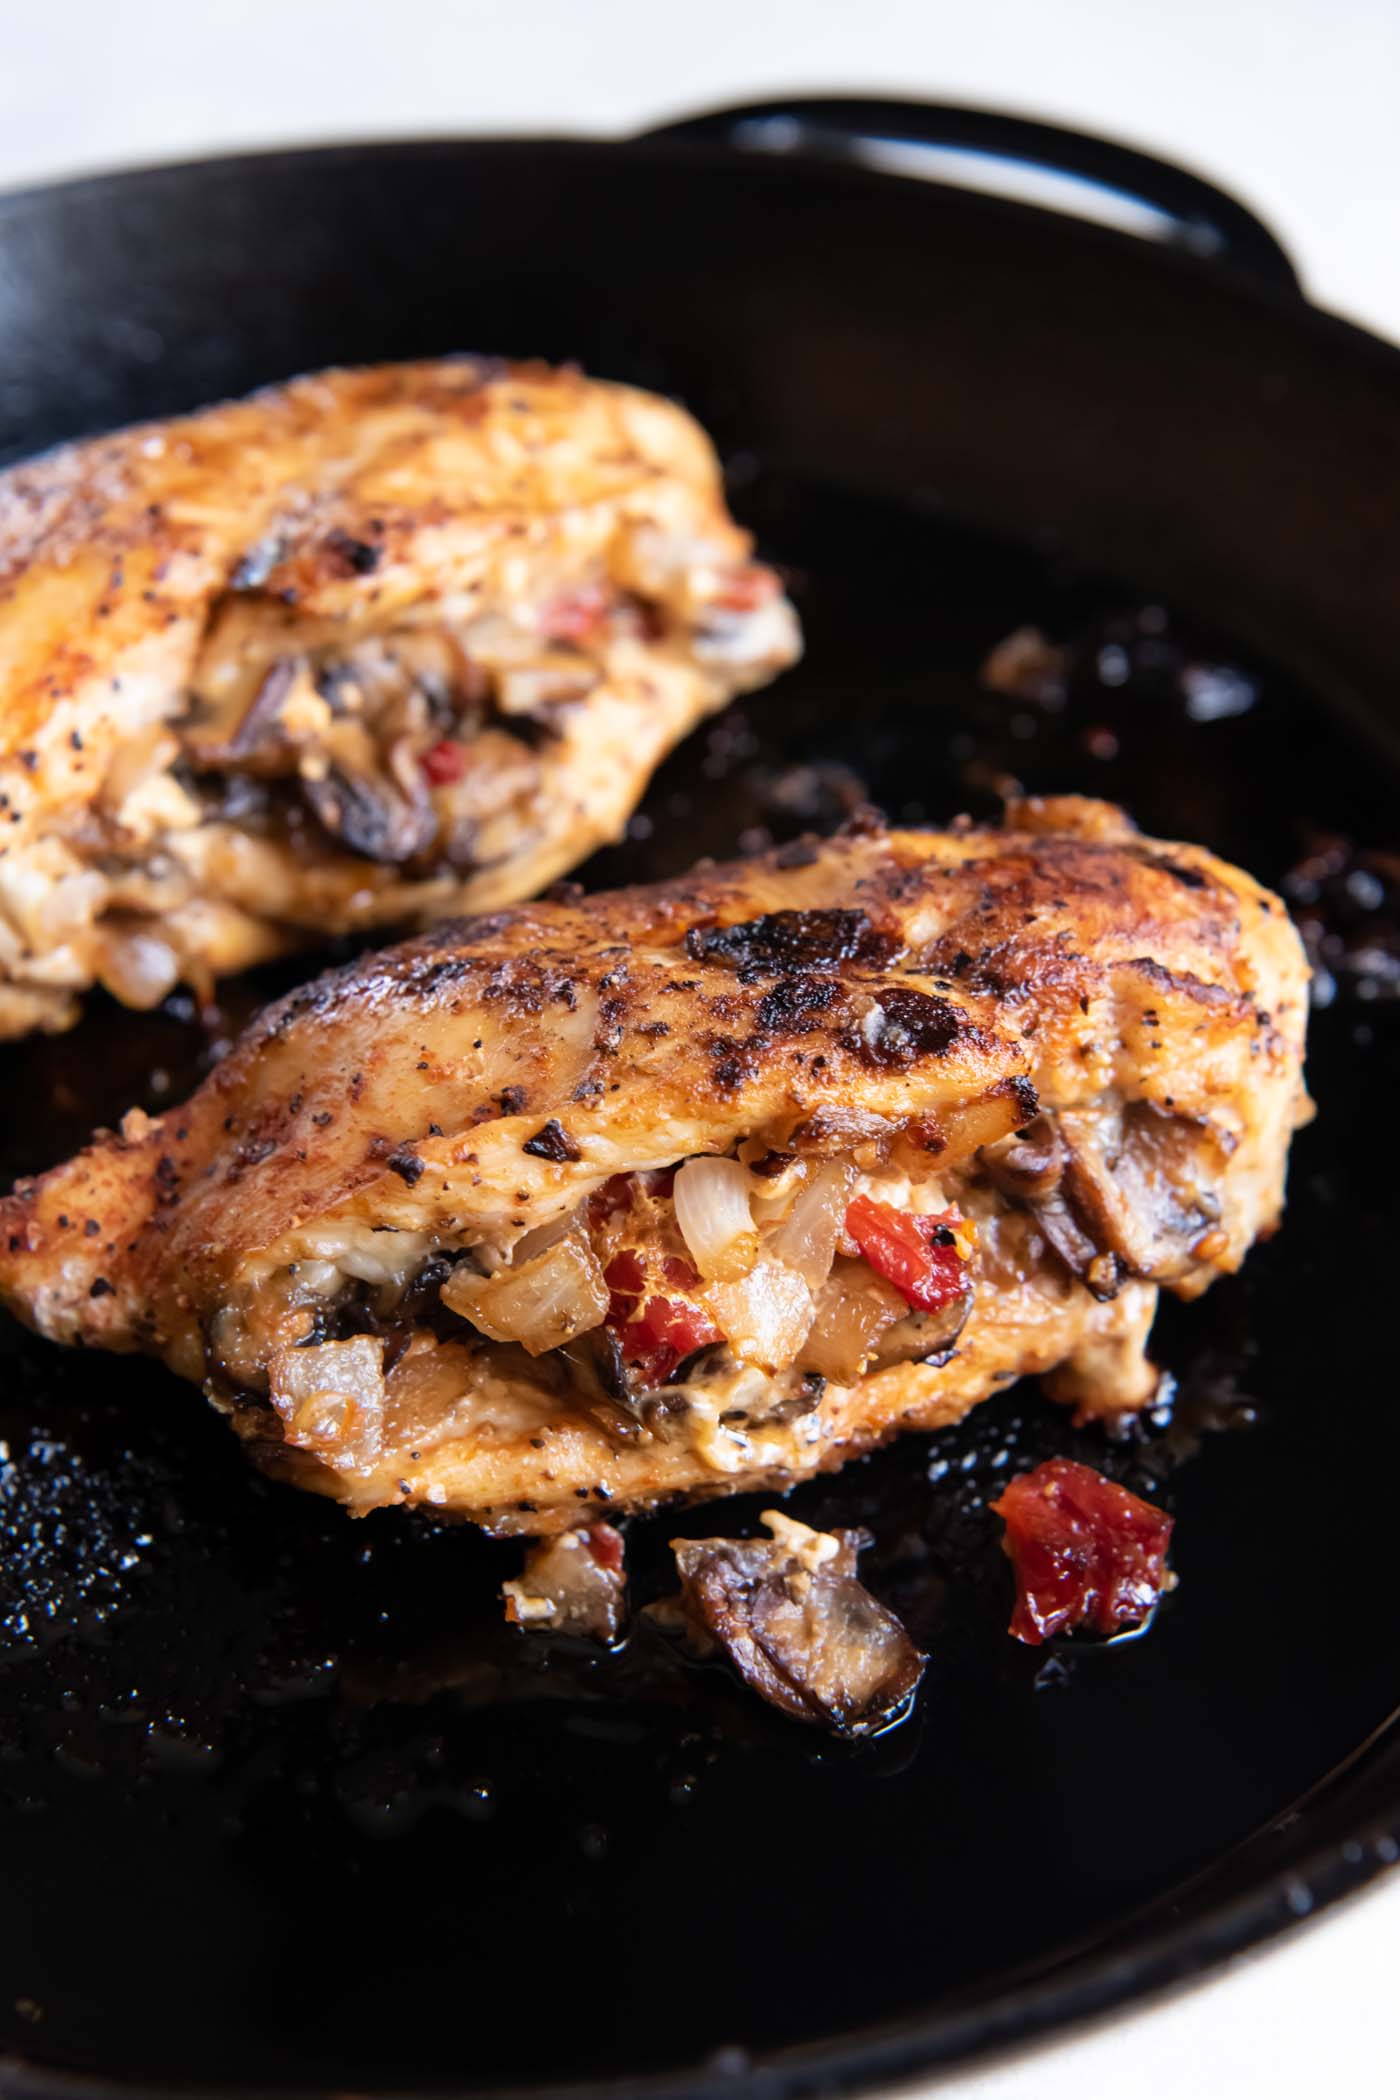 Cooked stuffed chicken breasts in a cast iron skillet.